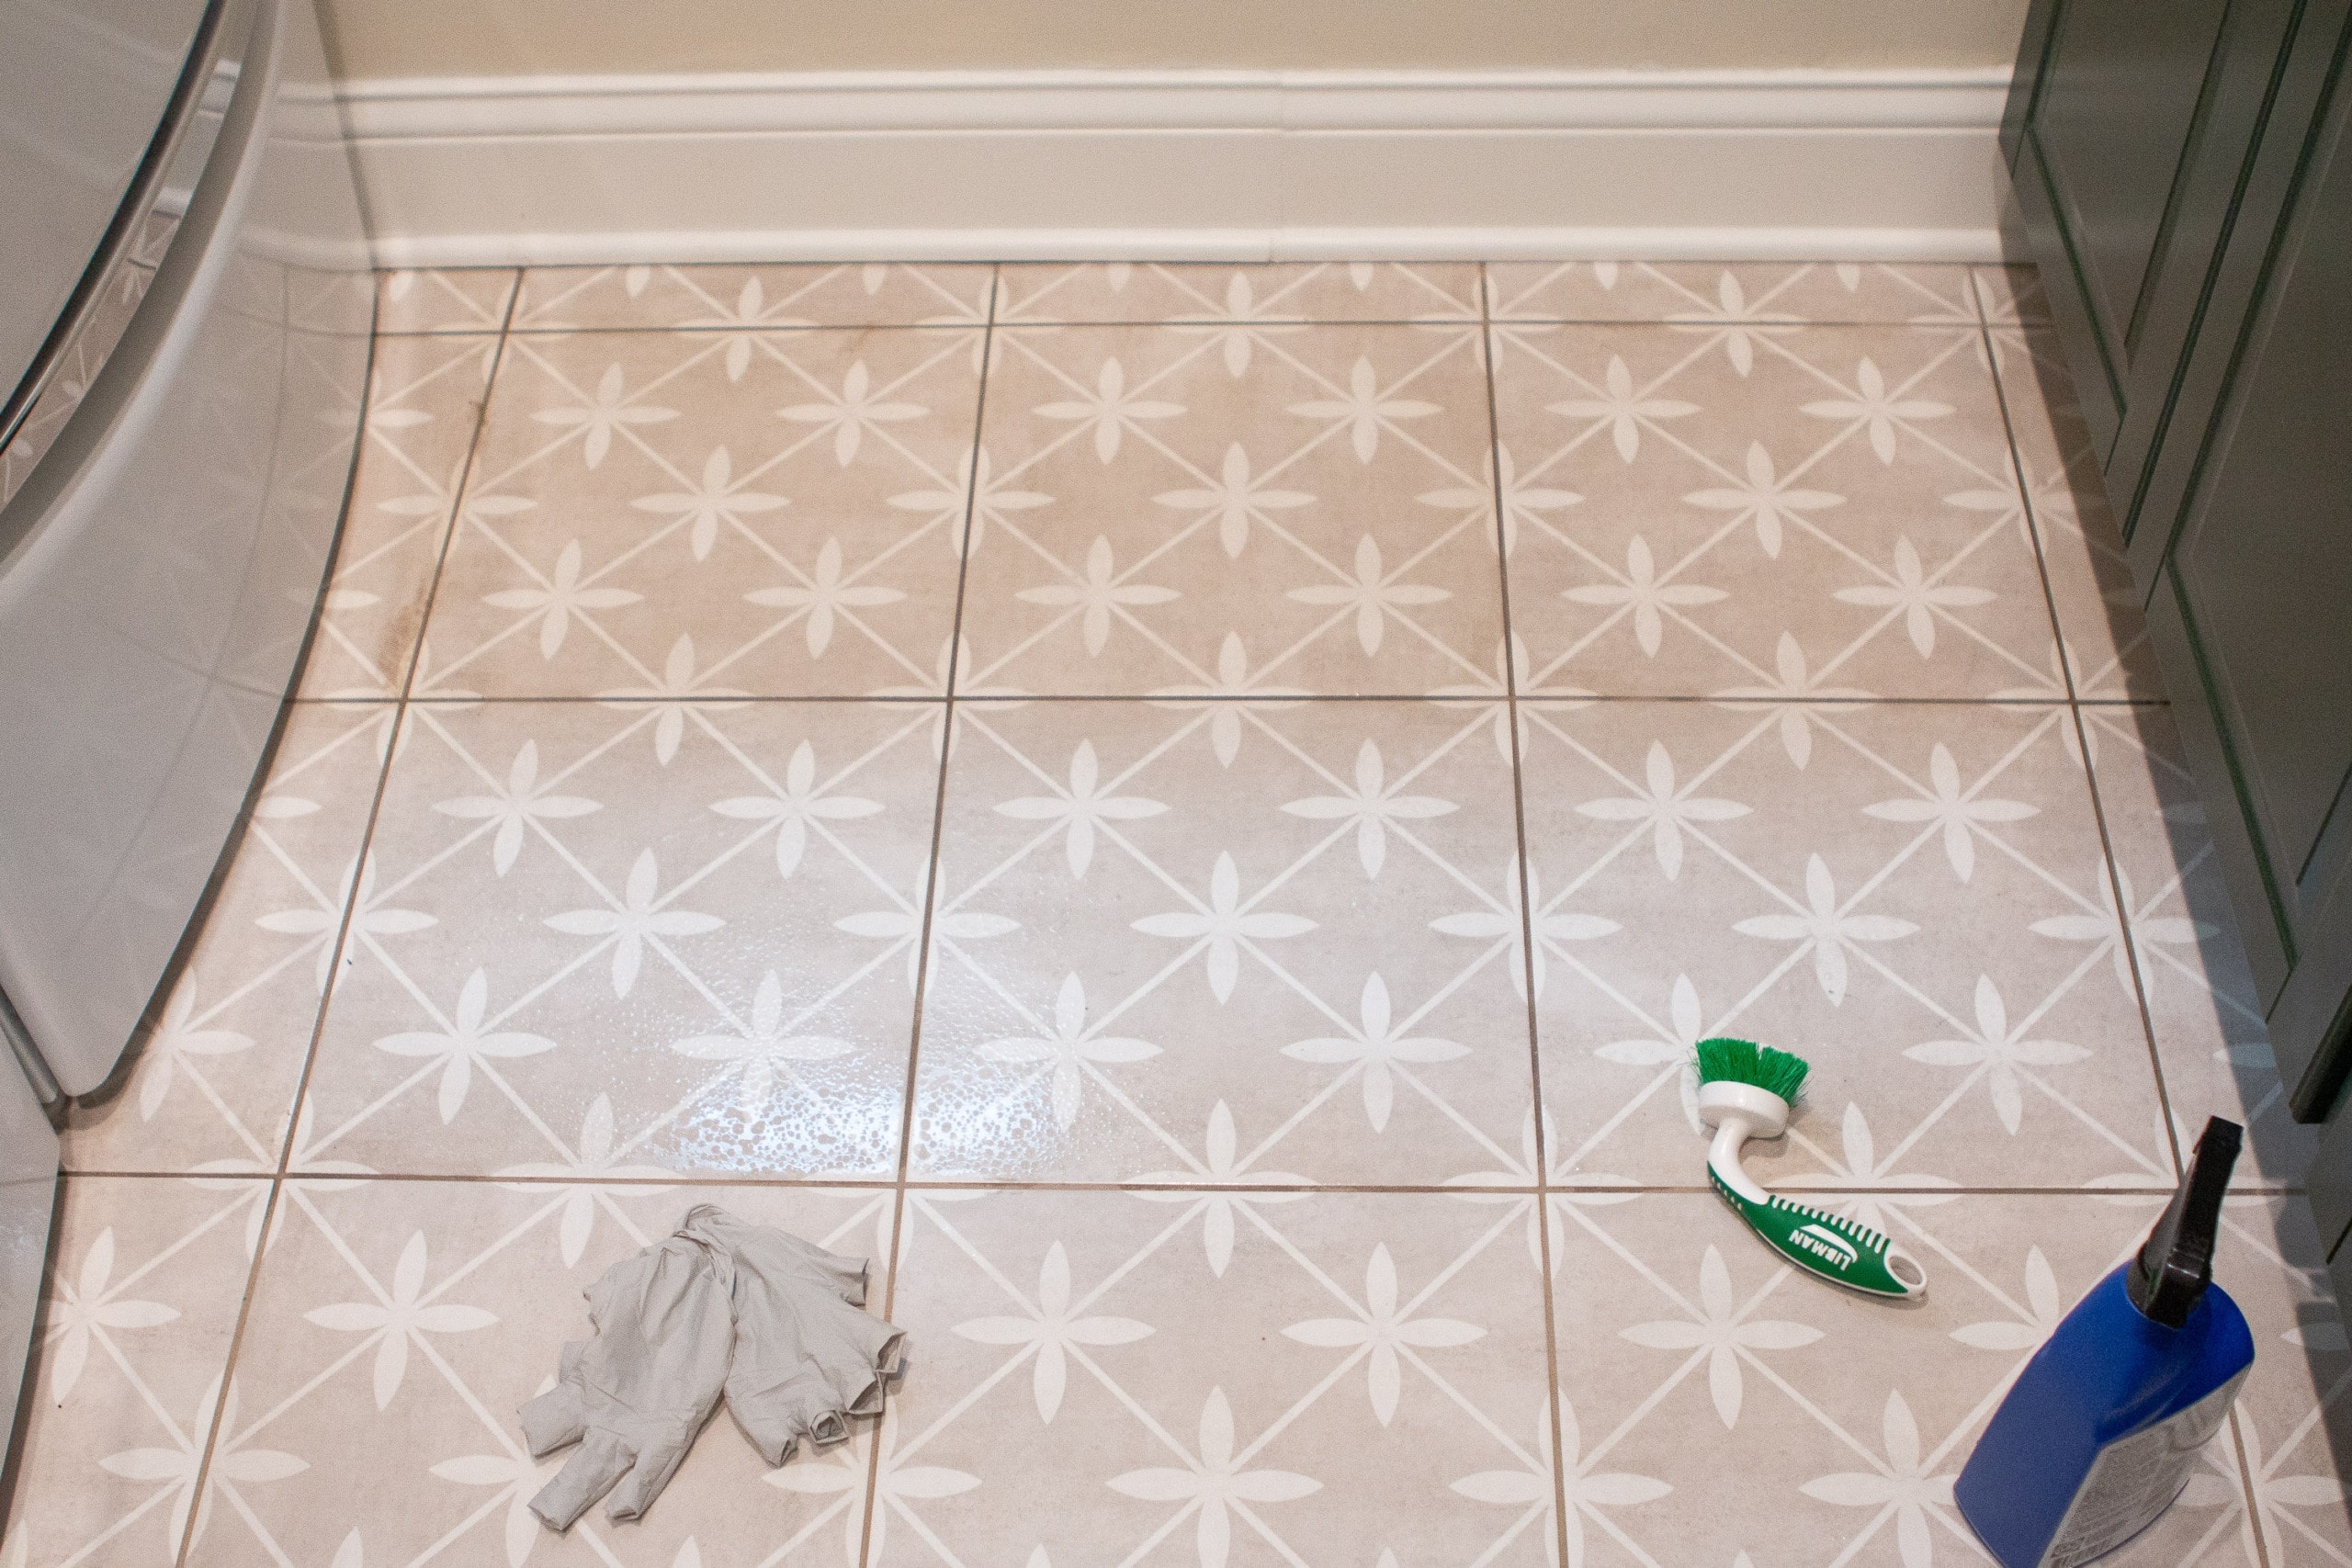 Clean And Seal Porcelain Tile Grout, Are You Supposed To Seal Porcelain Tile